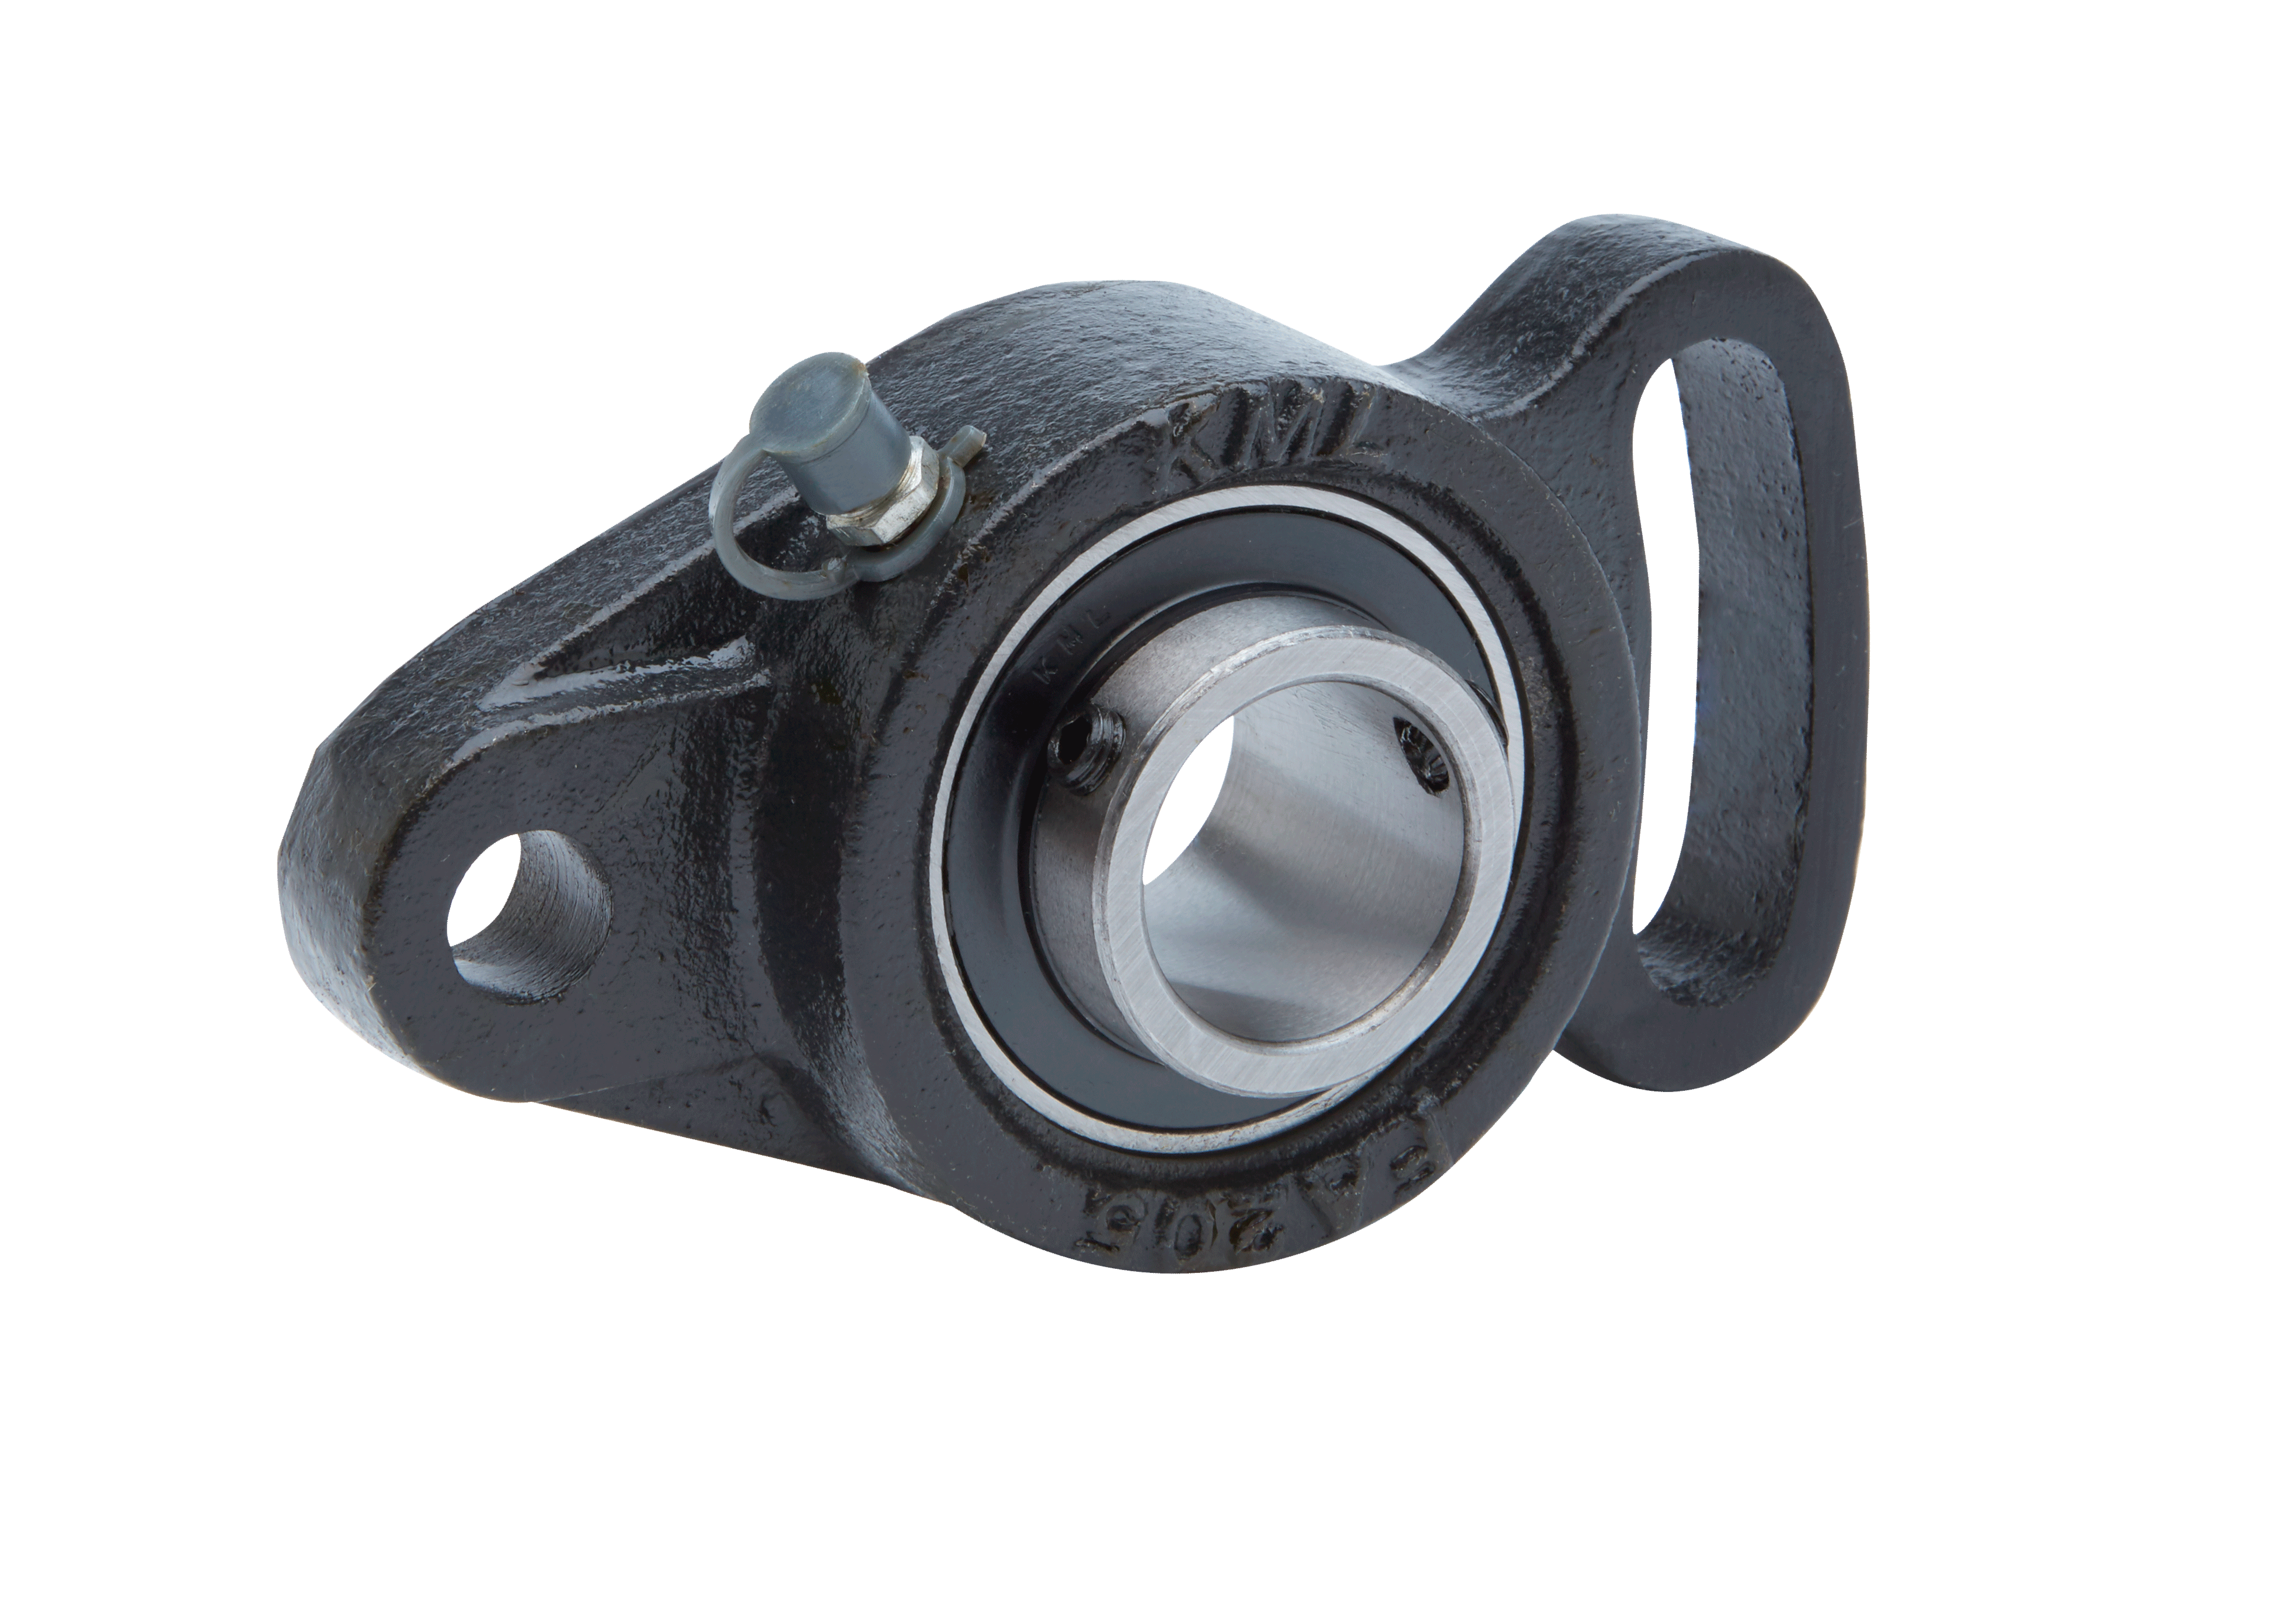 1.1875 in Bore Concentric Collar Locking Contact Seal Two-Bolt Flange 128762 Flange-Mount Ball Bearing Unit Cast Iron Housing Standard Duty